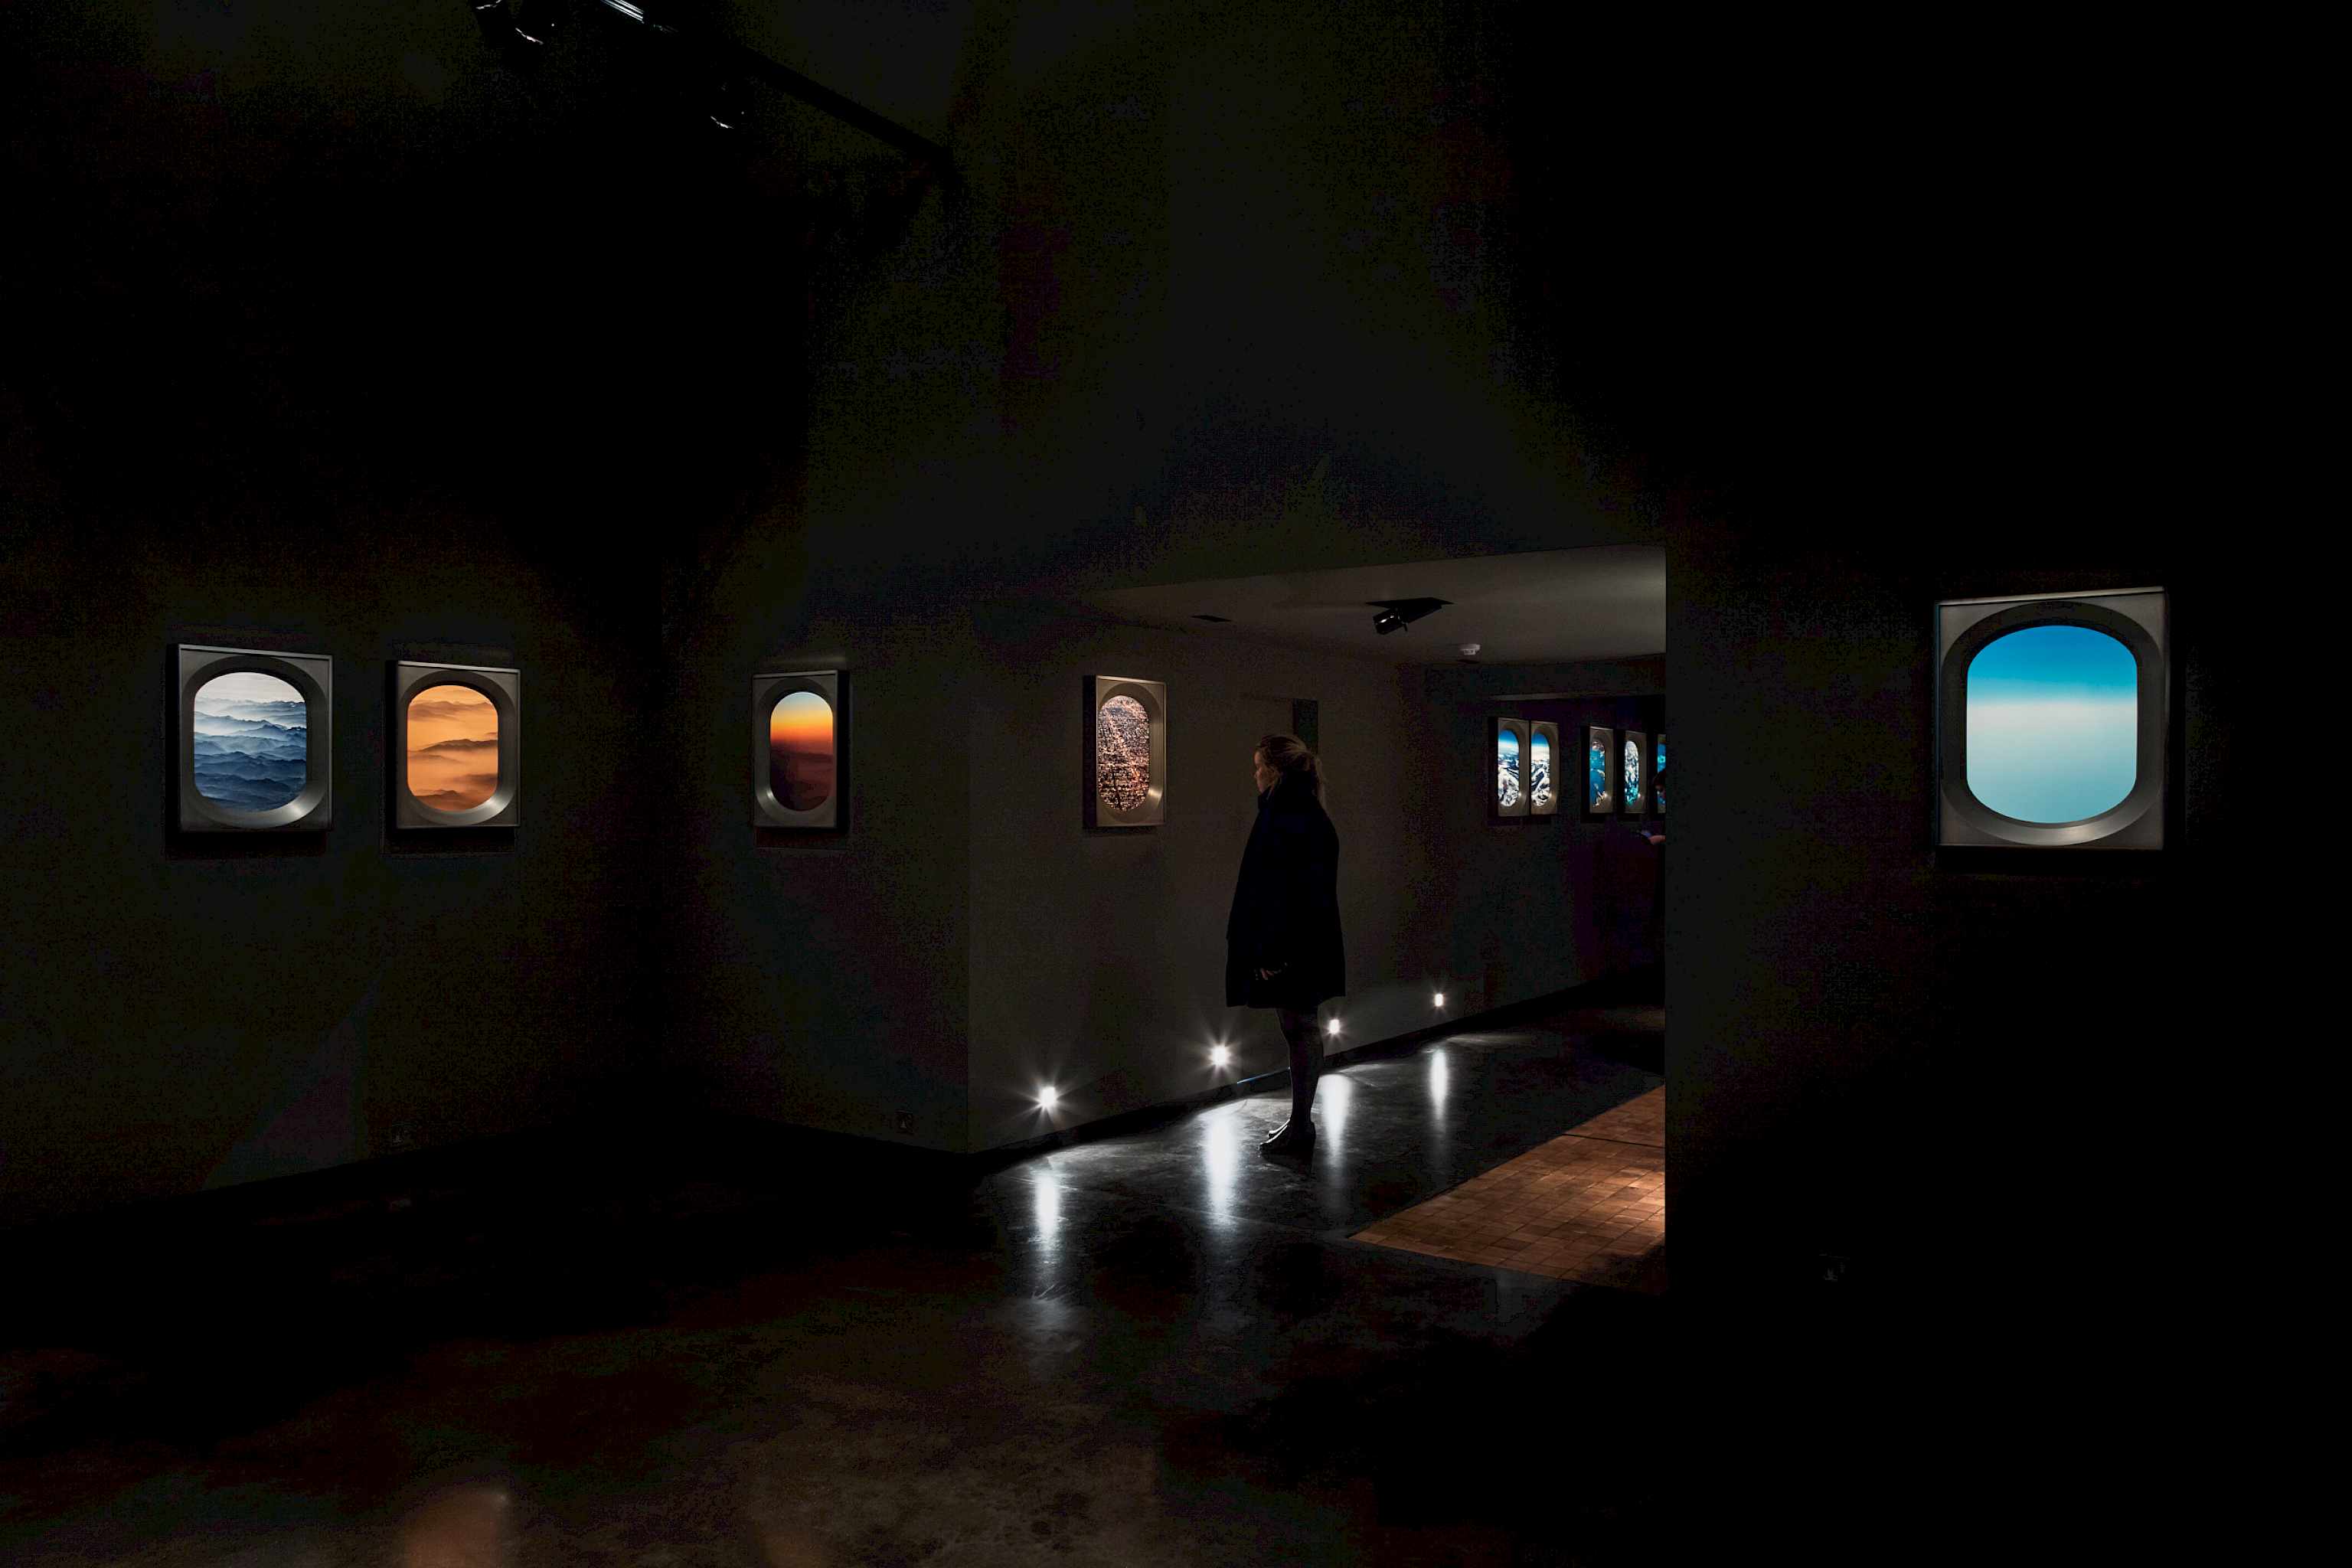 Installation view, photograph by Tim Burrough